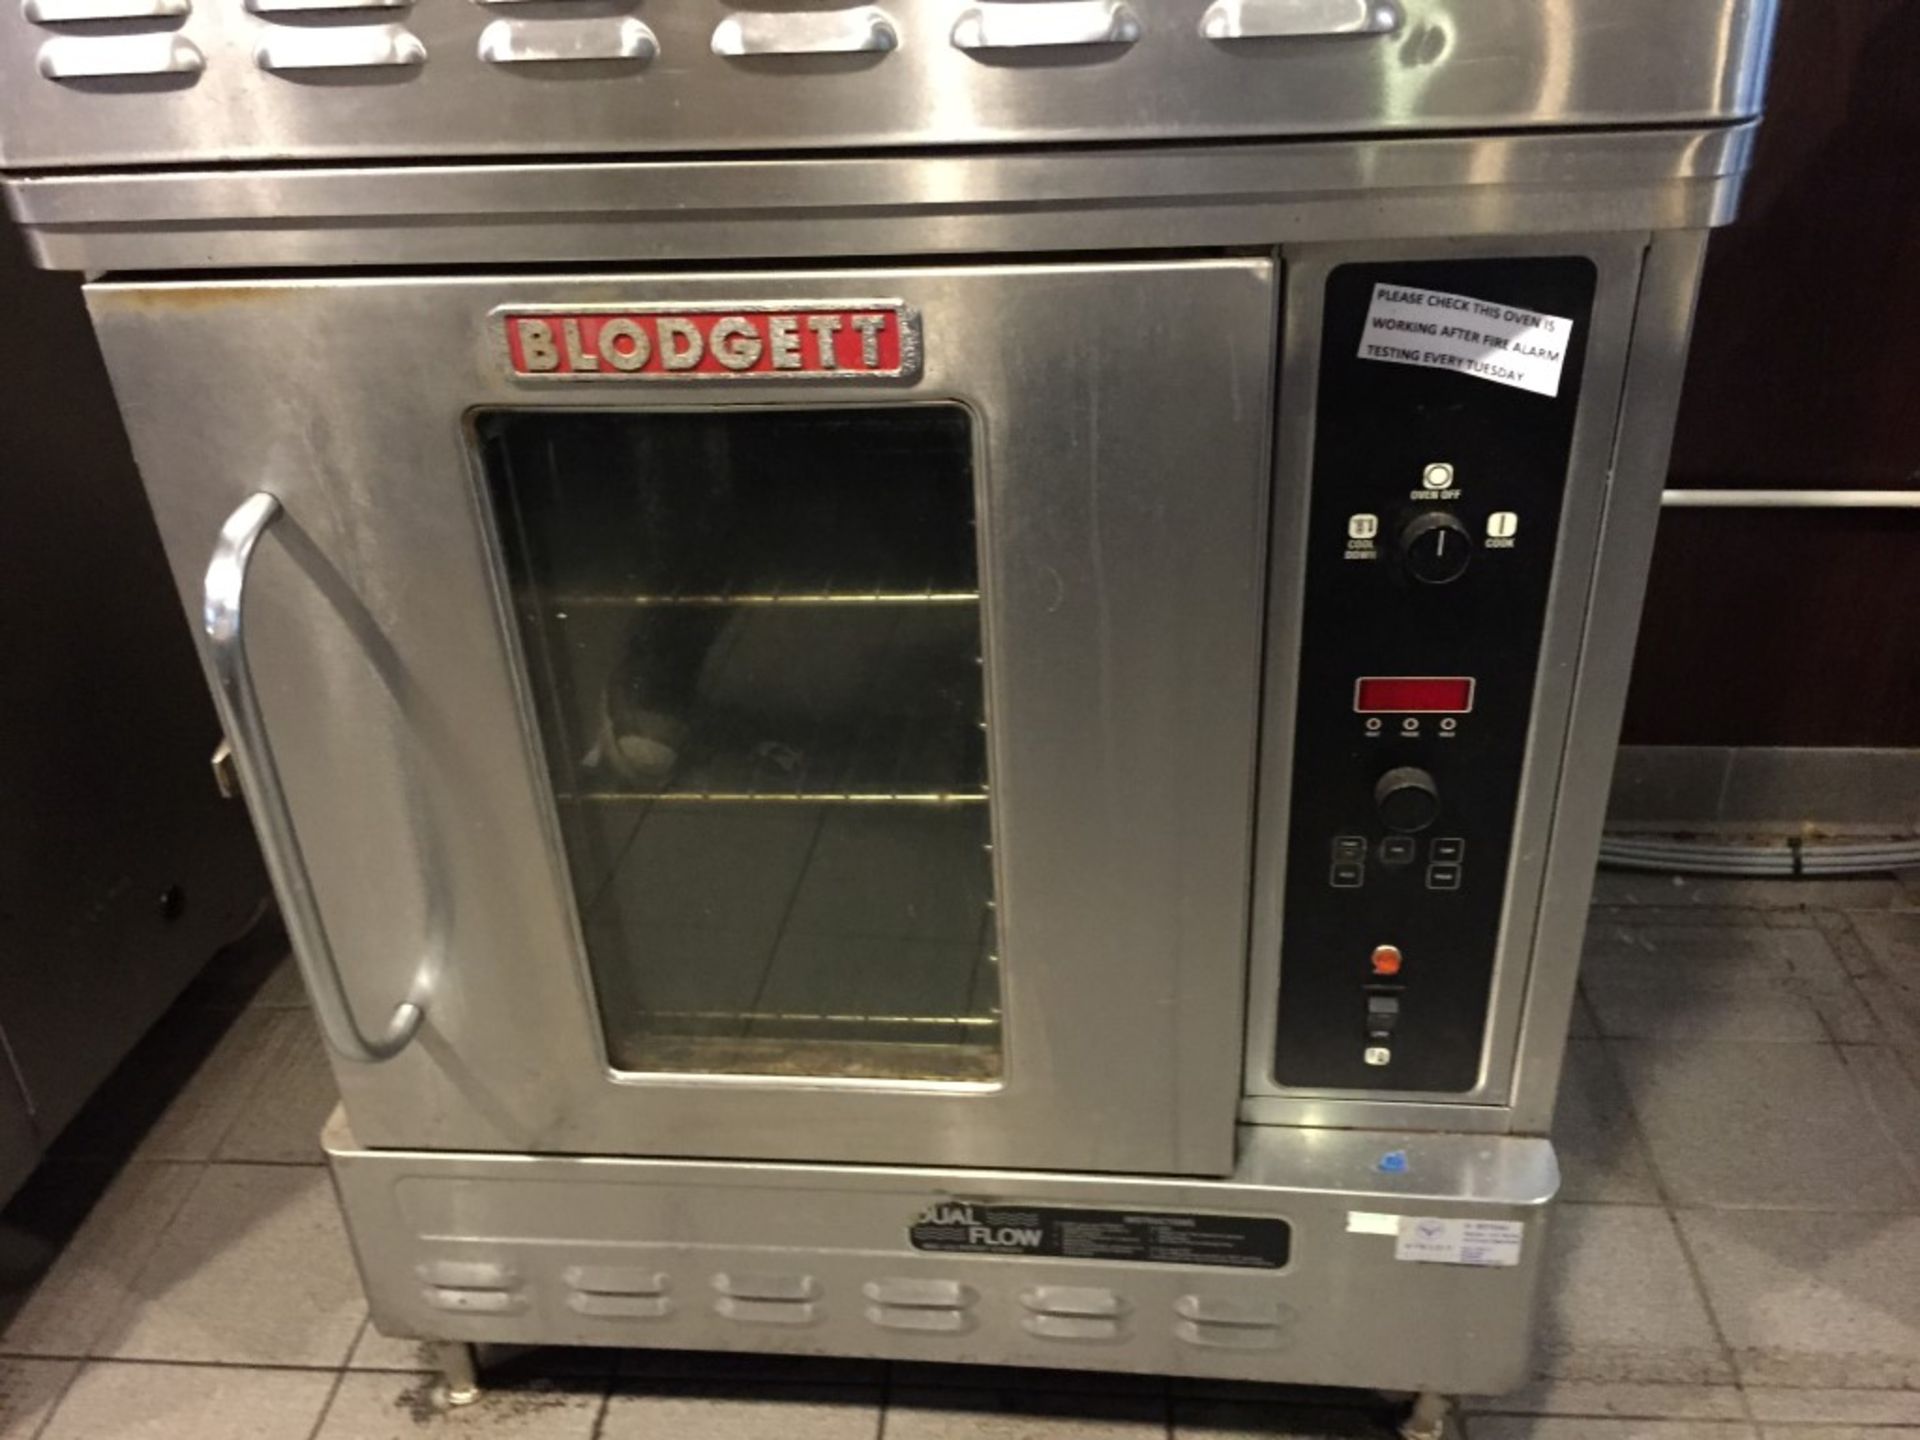 1 x Blodgett Convection Oven - Model DFG50 - Features Duel Flow, Half Size, Single Deck, Solid State - Image 7 of 7